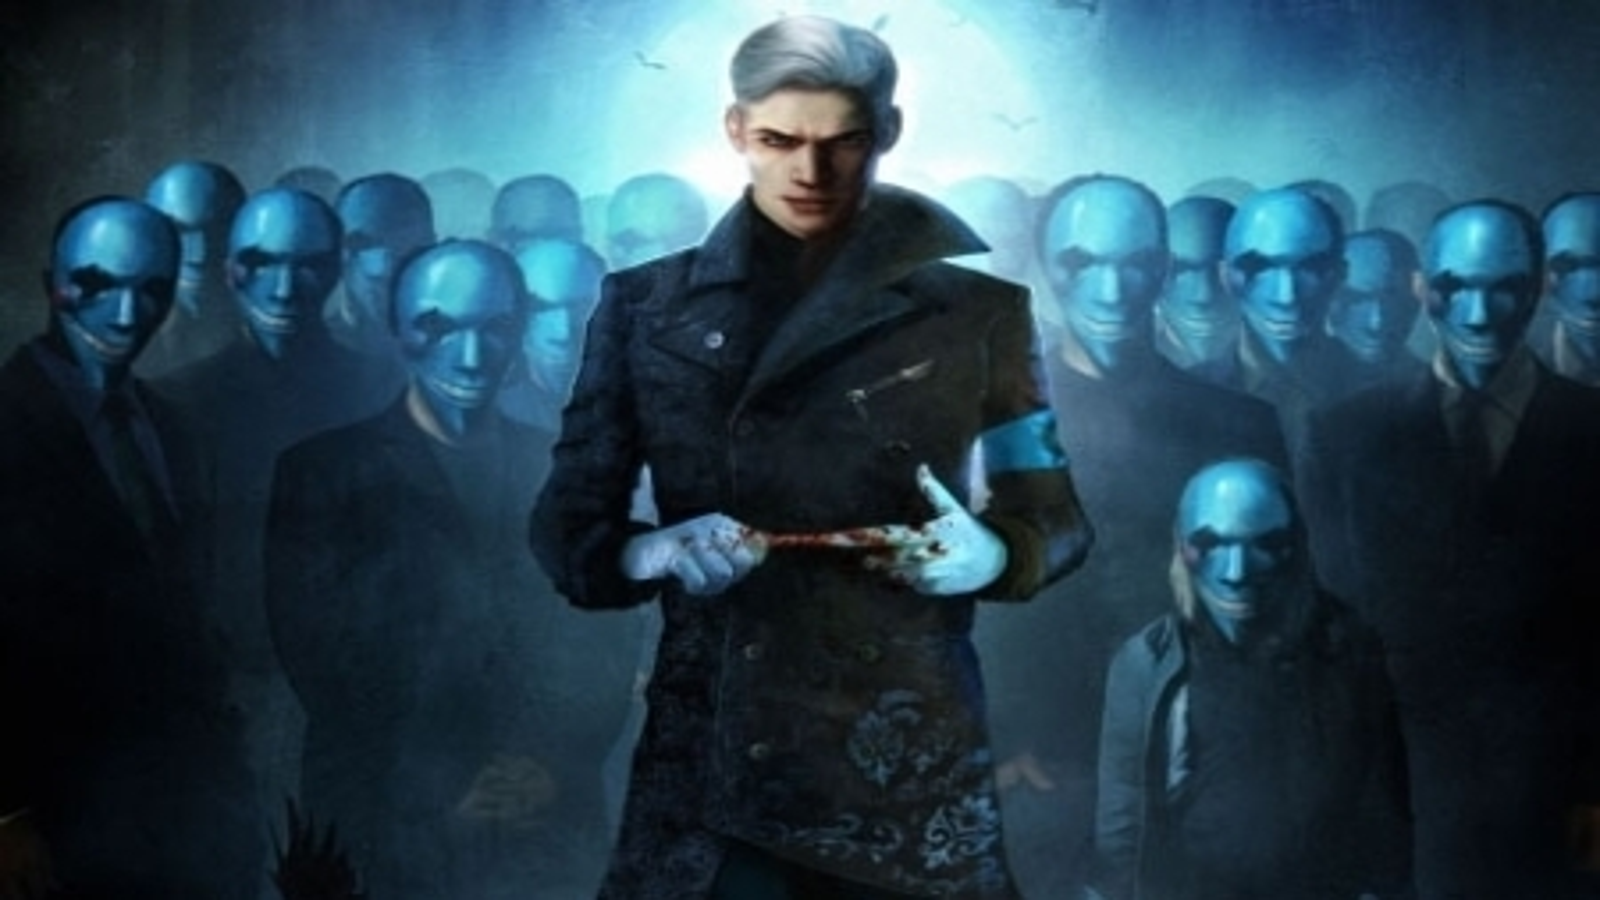 DmC Devil May Cry Preview - Vergil Also Stars In Devil May Cry Reboot -  Game Informer